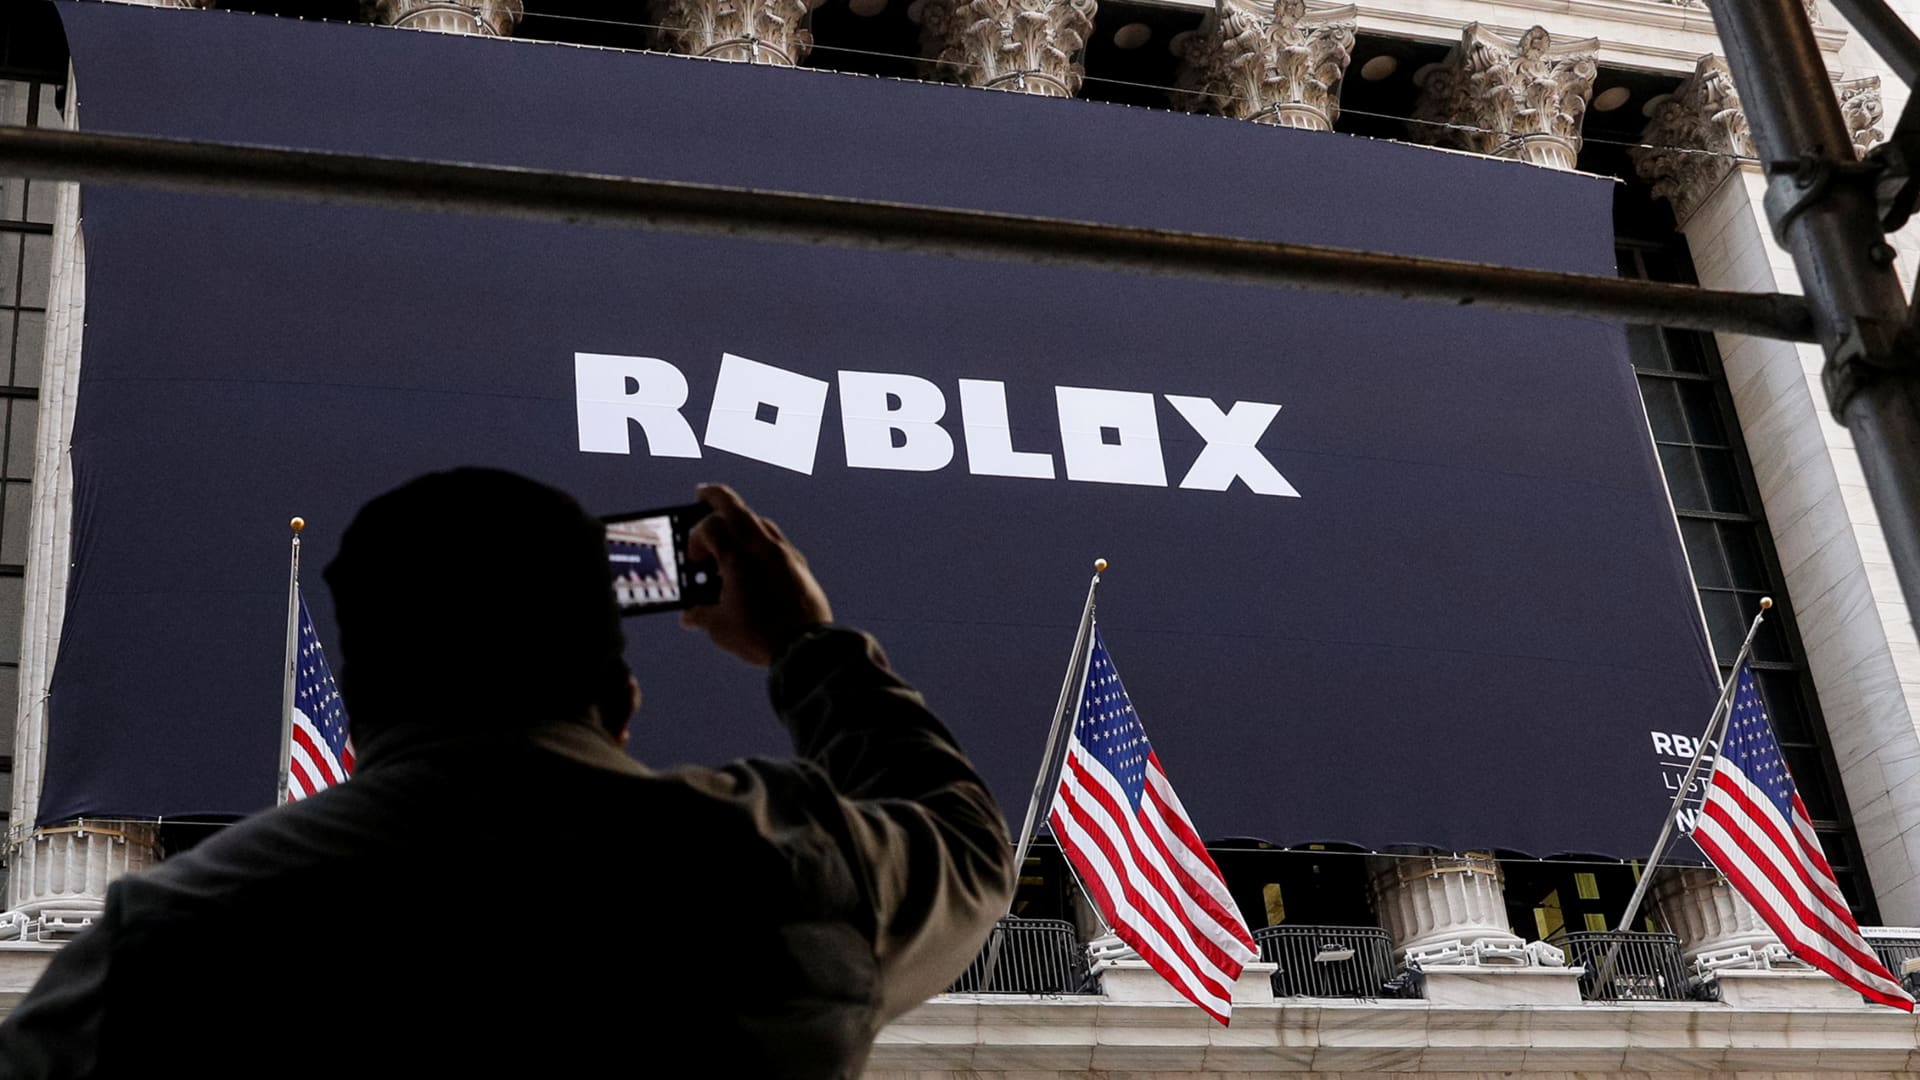 Roblox shares pop 18% on September user growth